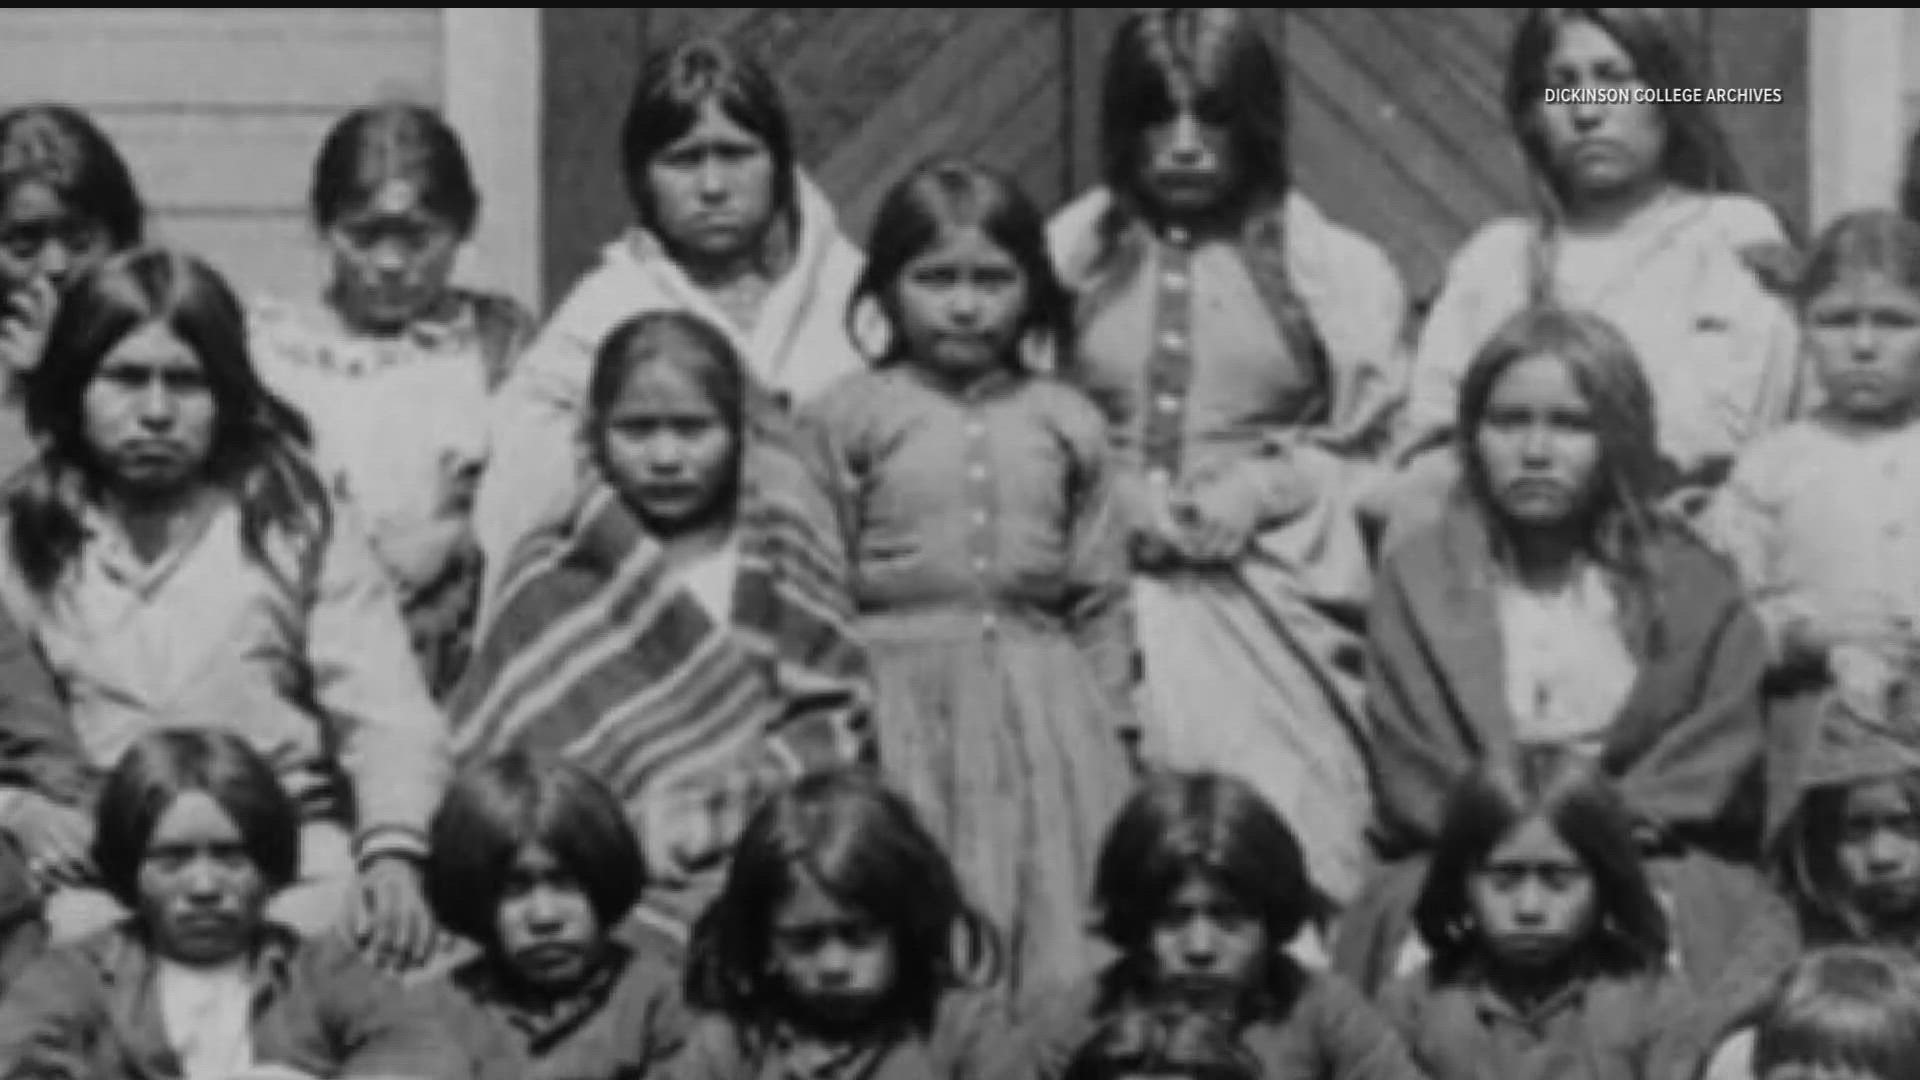 According to initial analysis from the report, 19 Federal Indian Boarding Schools accounted for more than 500 child deaths.